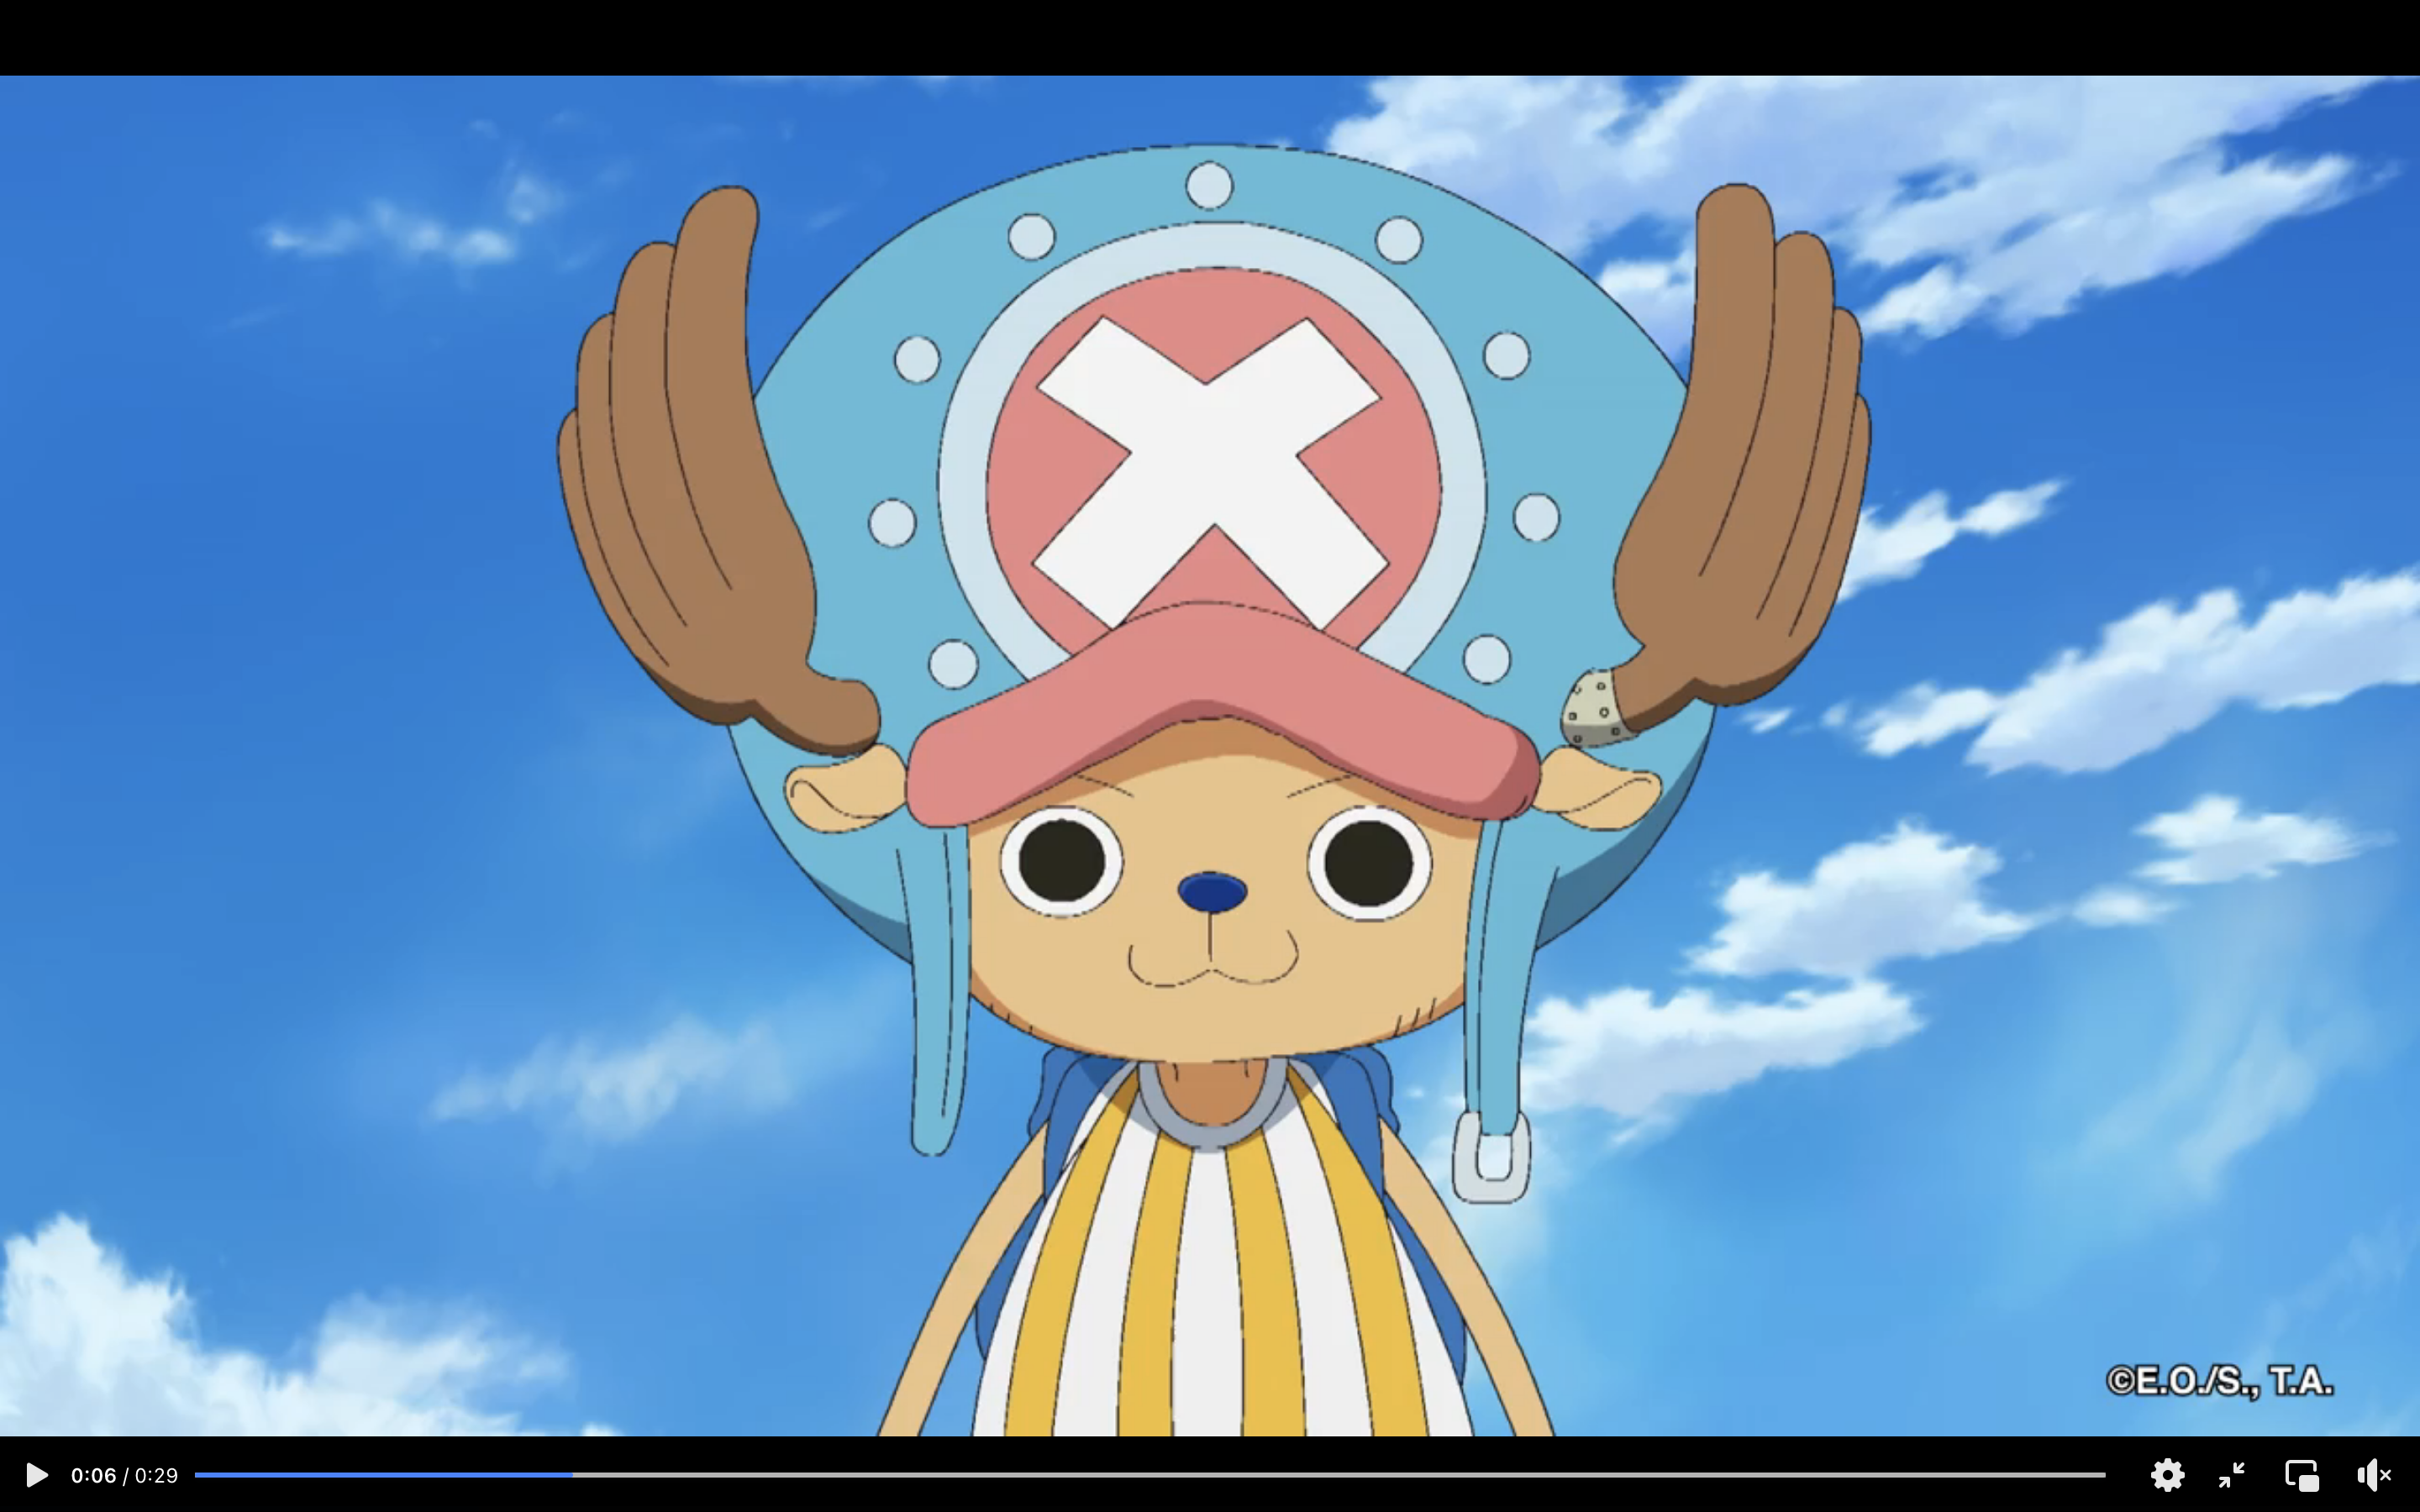 Things that still surprise you about Onepiece; like the Going